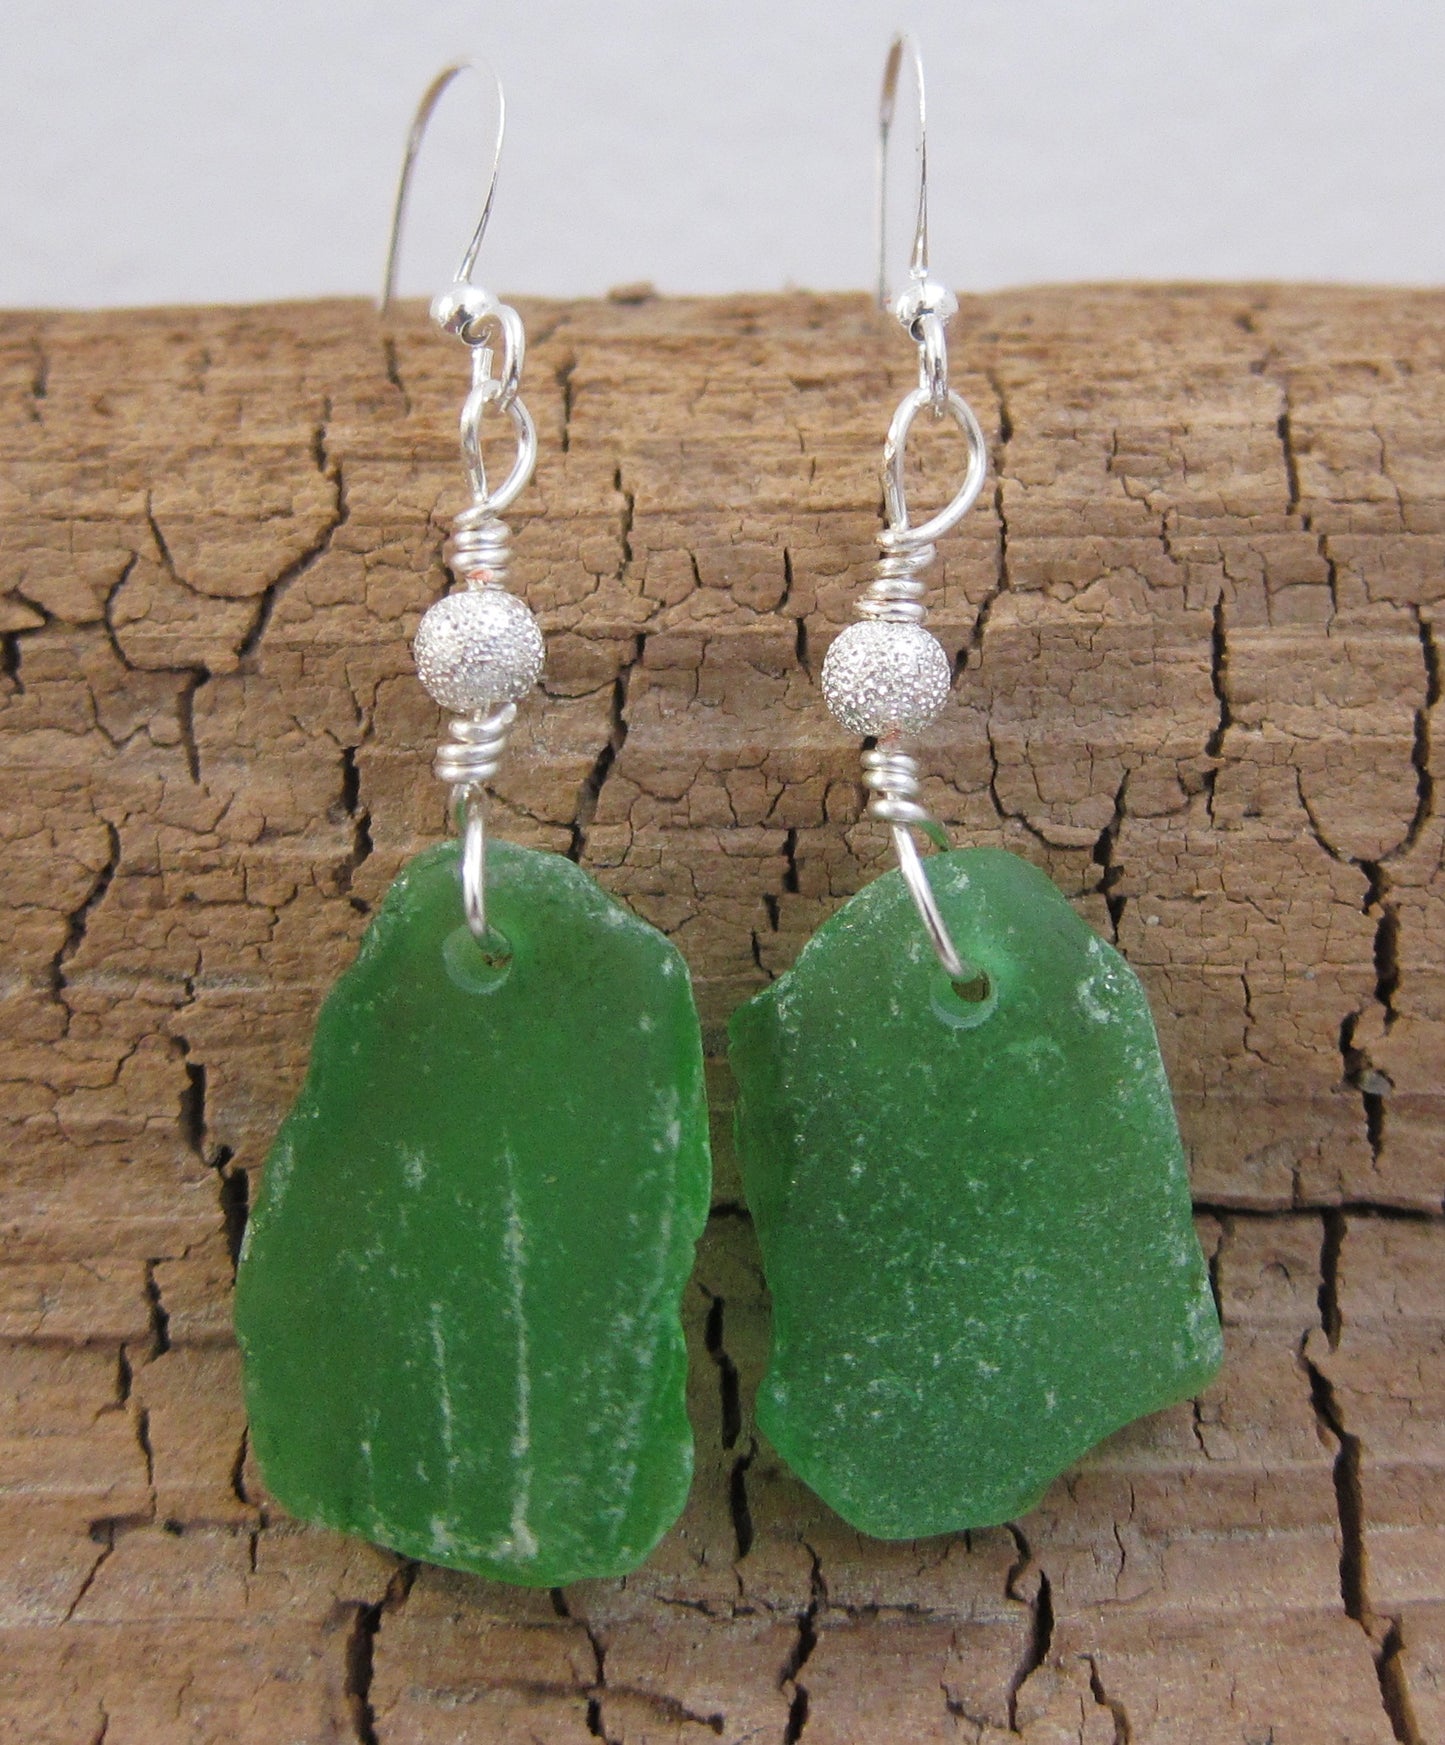 Stardust Earrings - Green sea glass from the South Shore, Nova Scotia, Canada with silver plated bead on a nickle-free hook